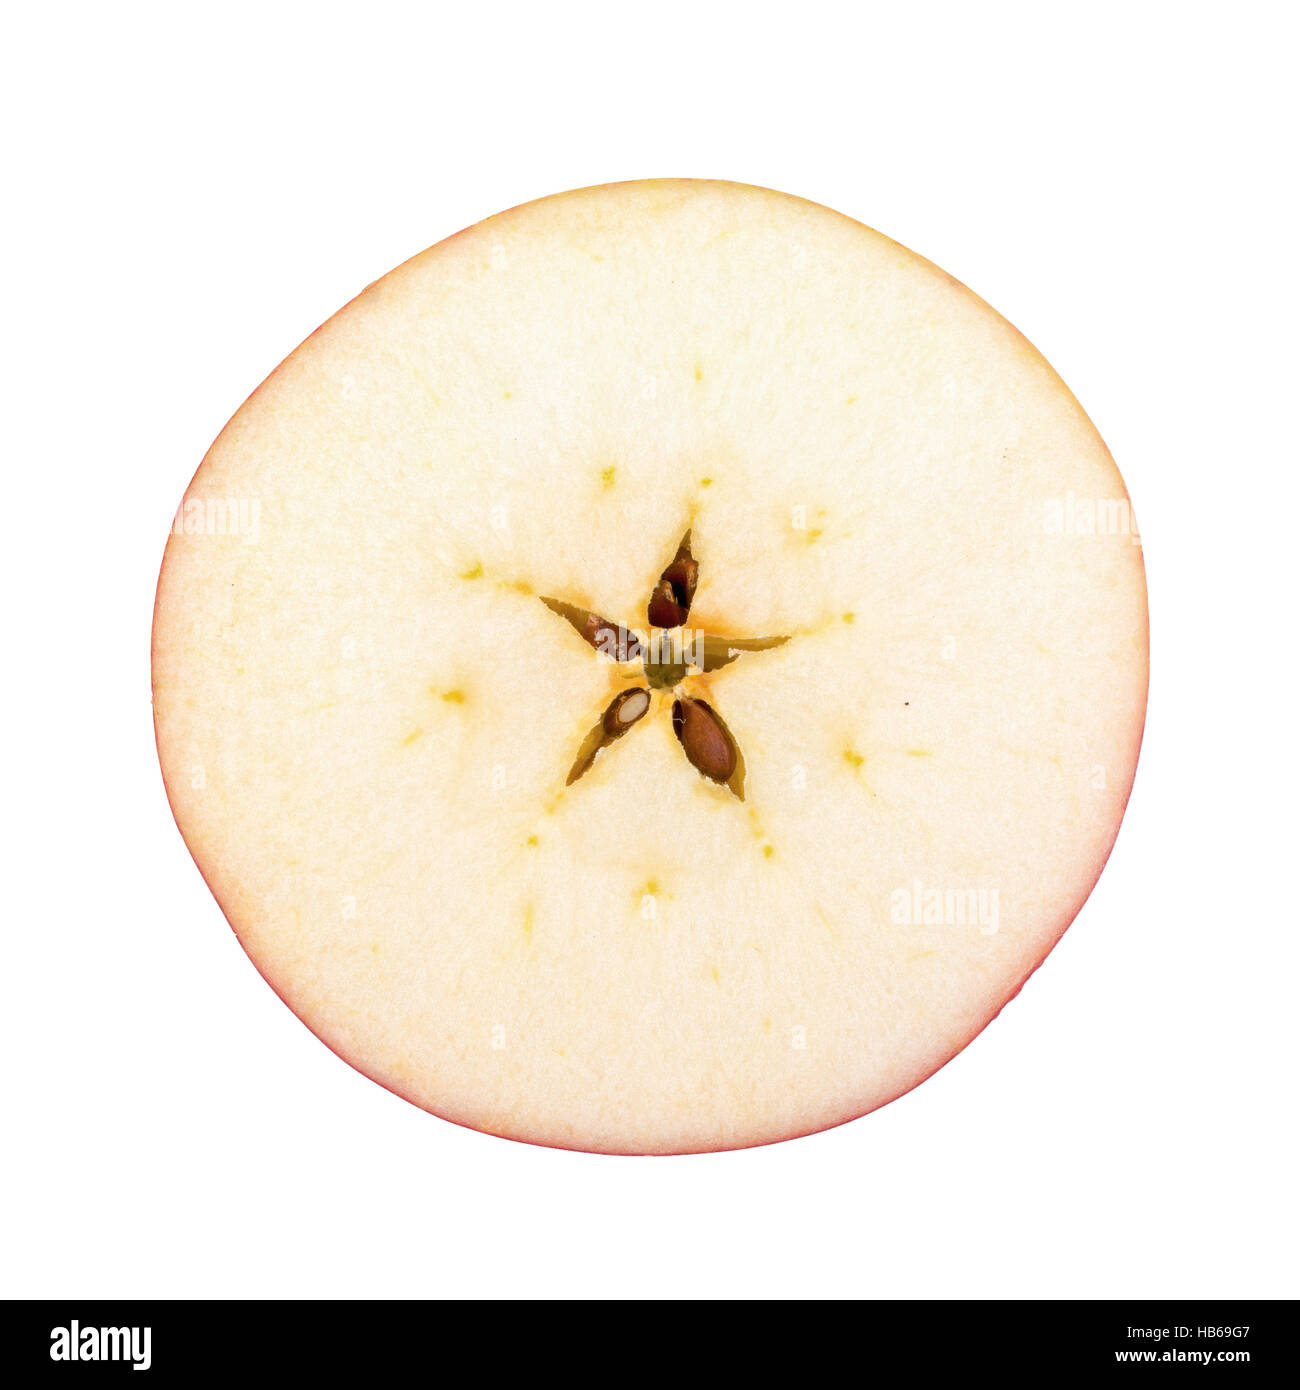 Cut apple on a white background Stock Photo